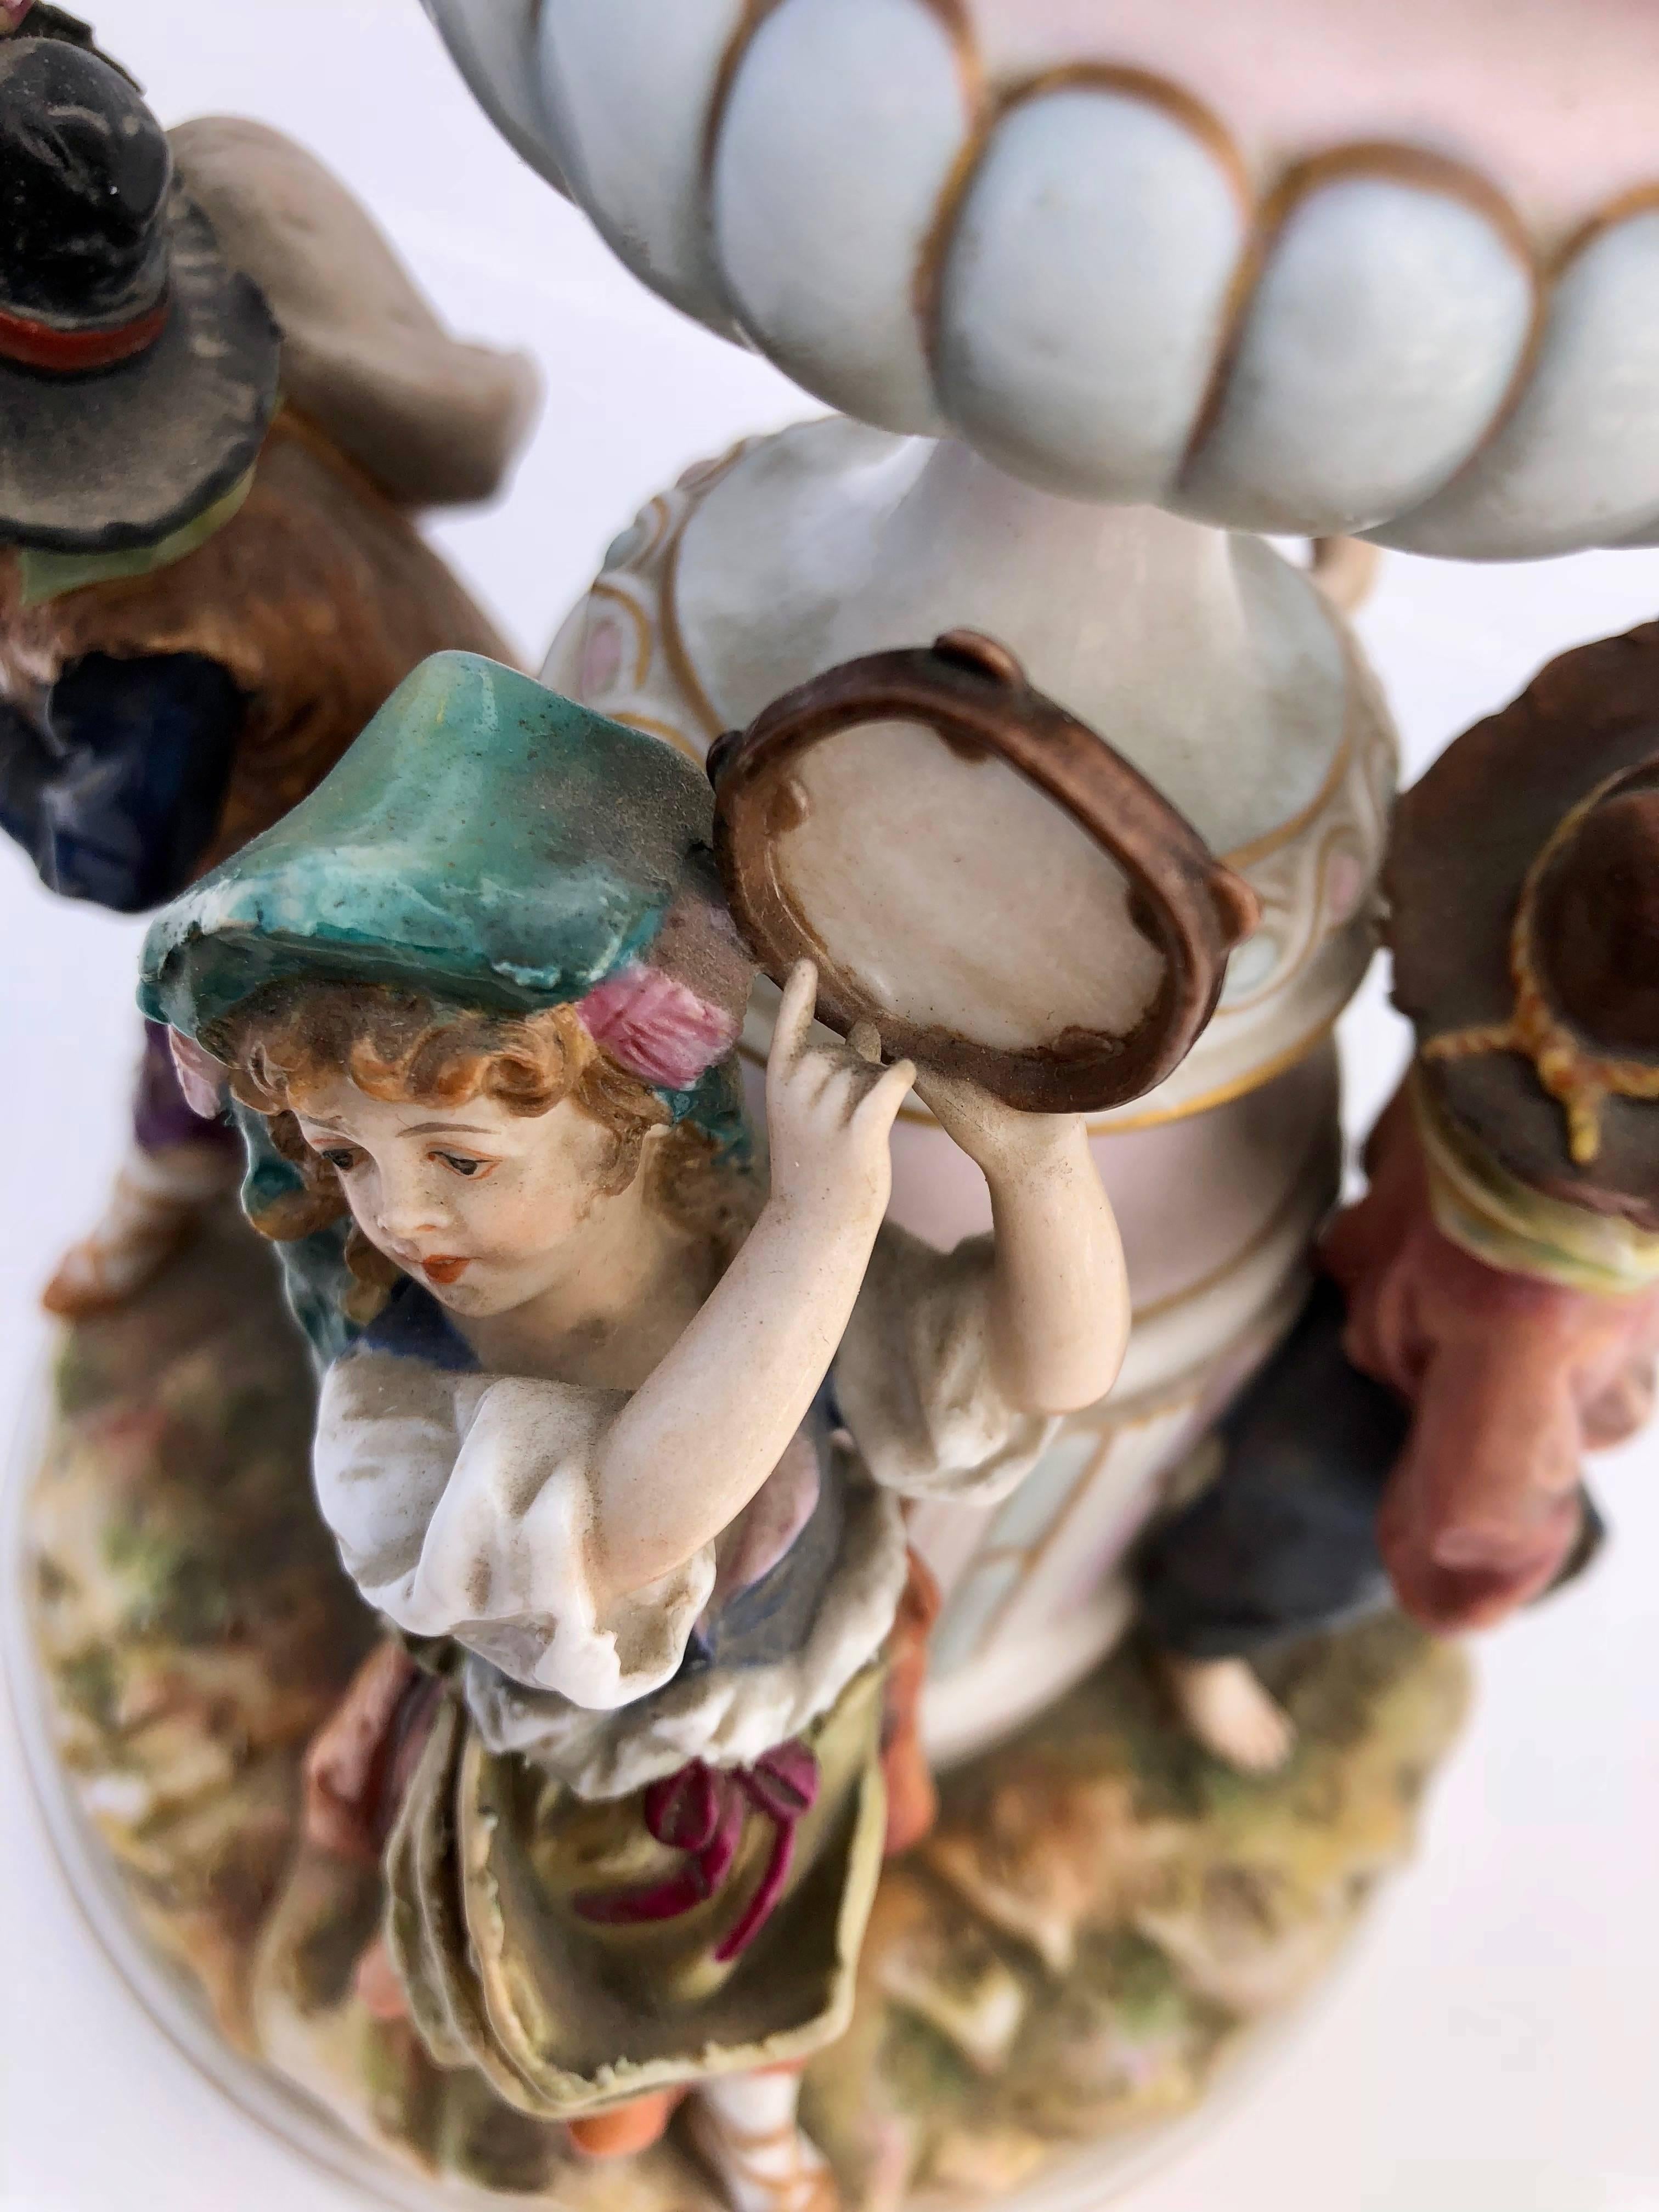 This beautiful antique French Saxe porcelain figurine includes a group of four adorable children in varying country poses. It has a variety of paint colors with a glossy finish and is simply gorgeous.